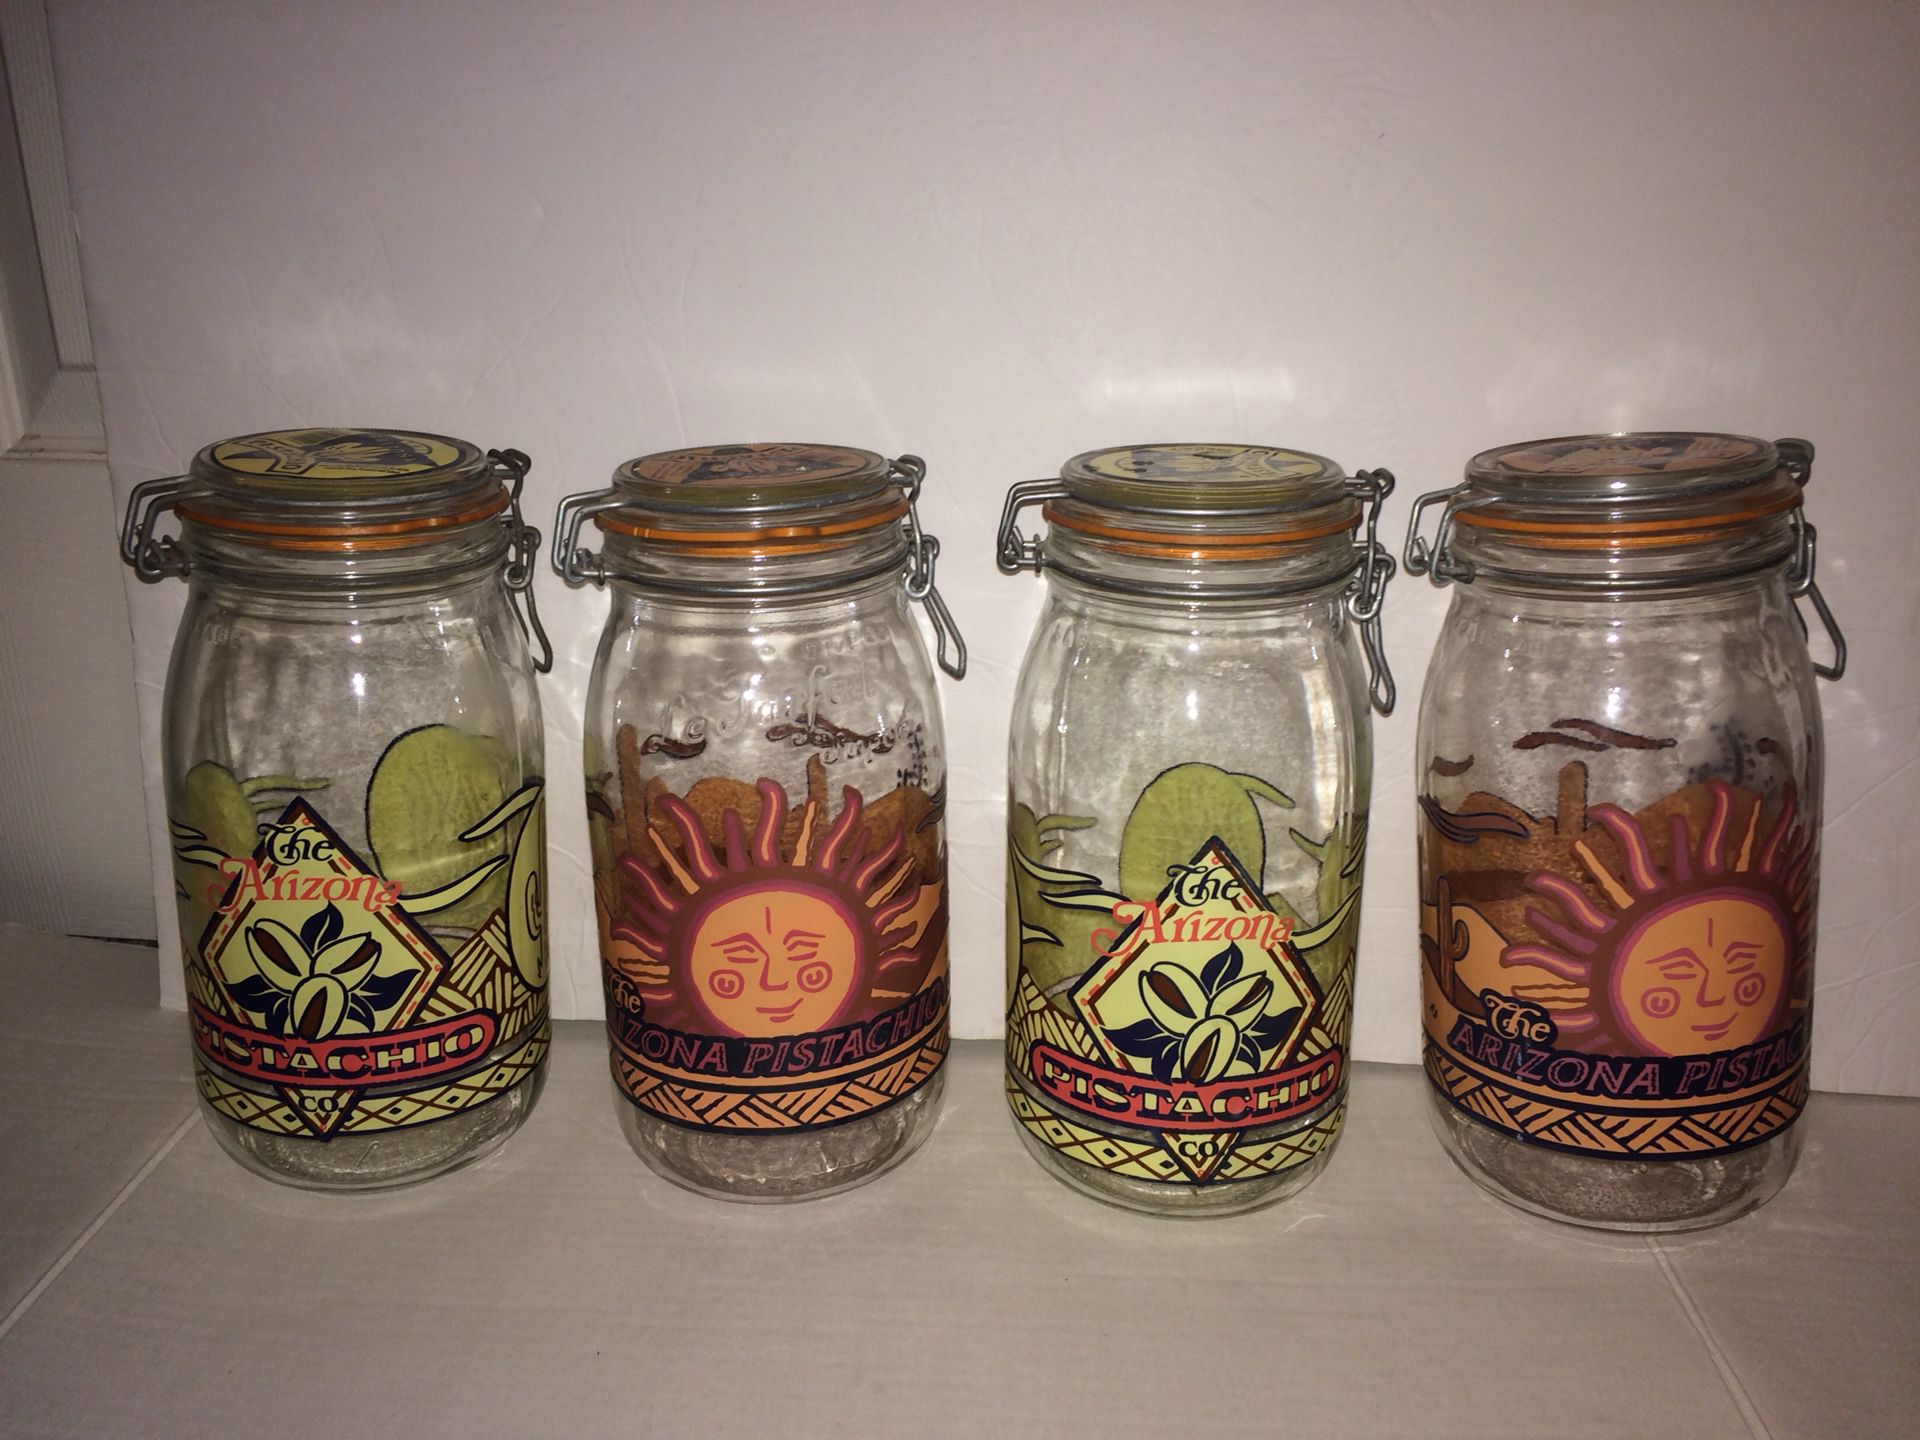 4 Vintage THE ARIZONA Pistachio Co. Large Glass Mason Jar Containers - $10 for ALL 4